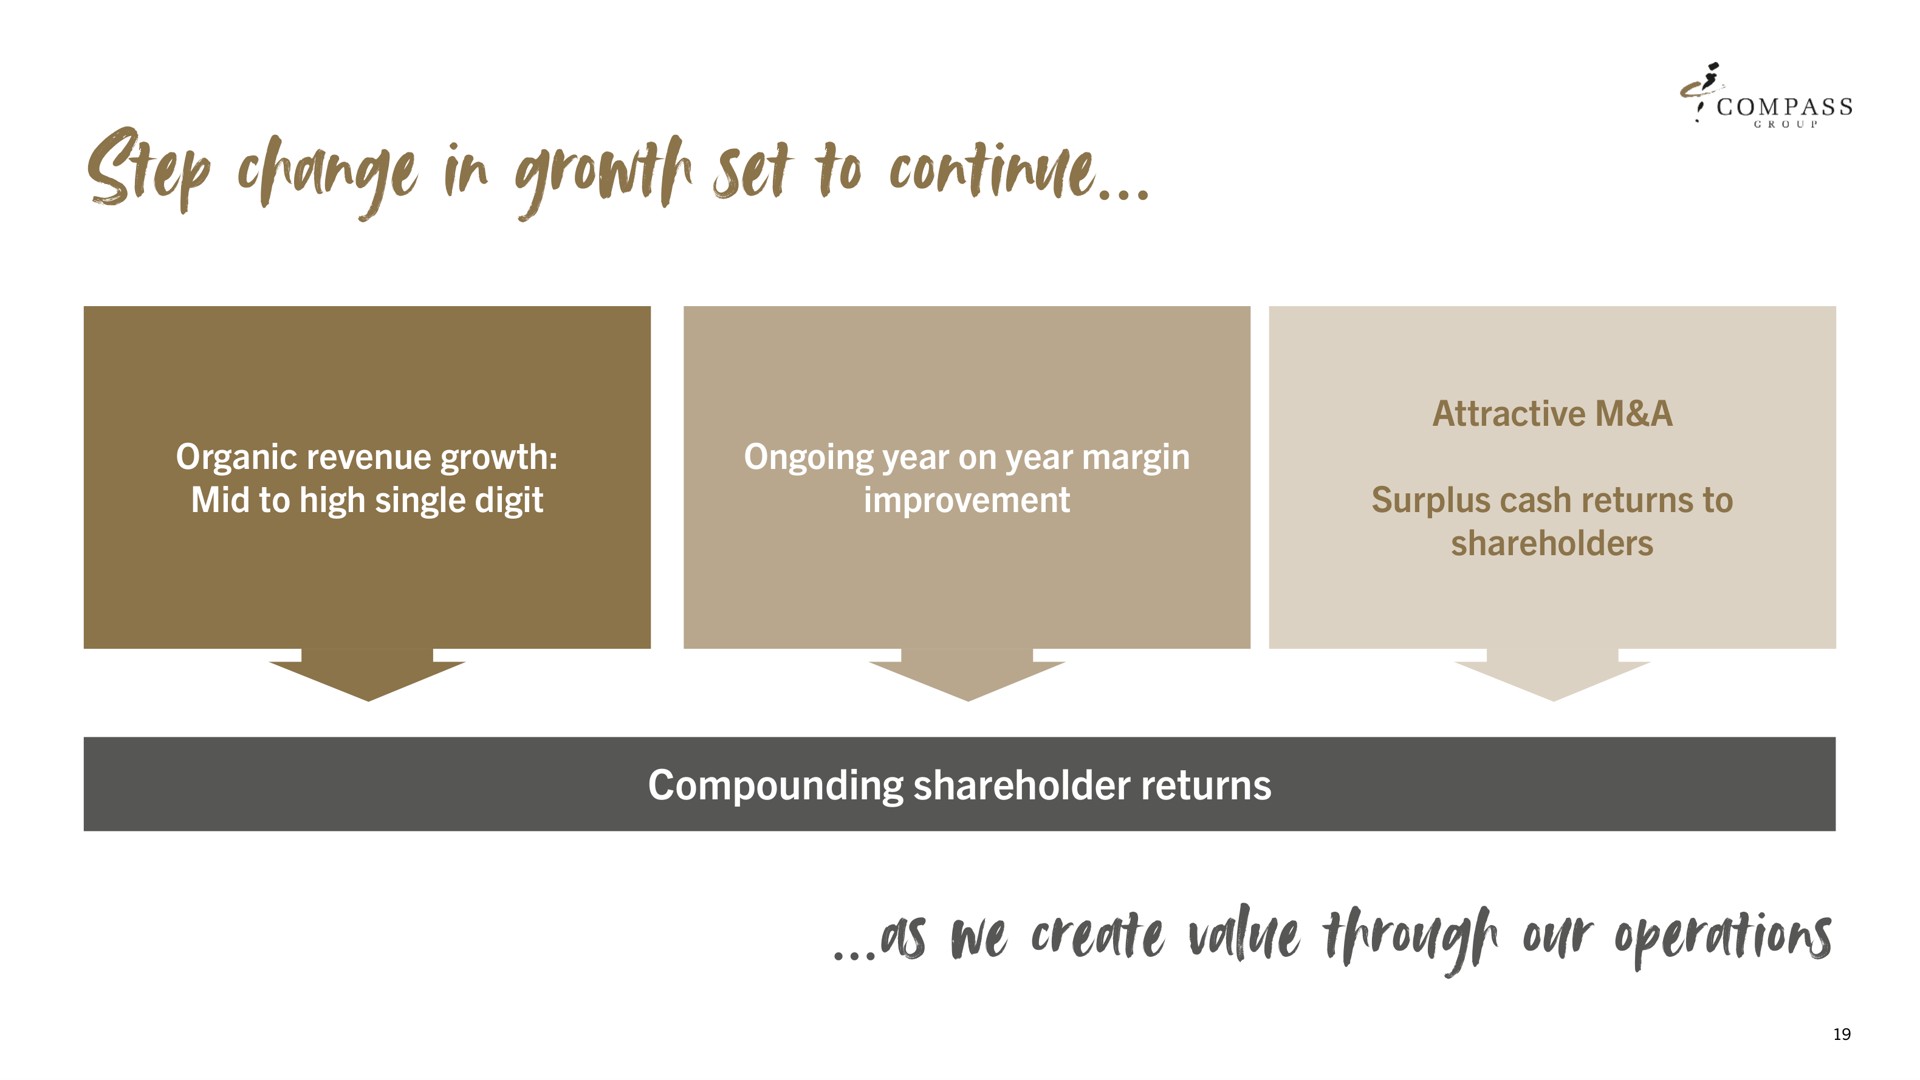 step change in growth set to continue as we create value our operations | Compass Group